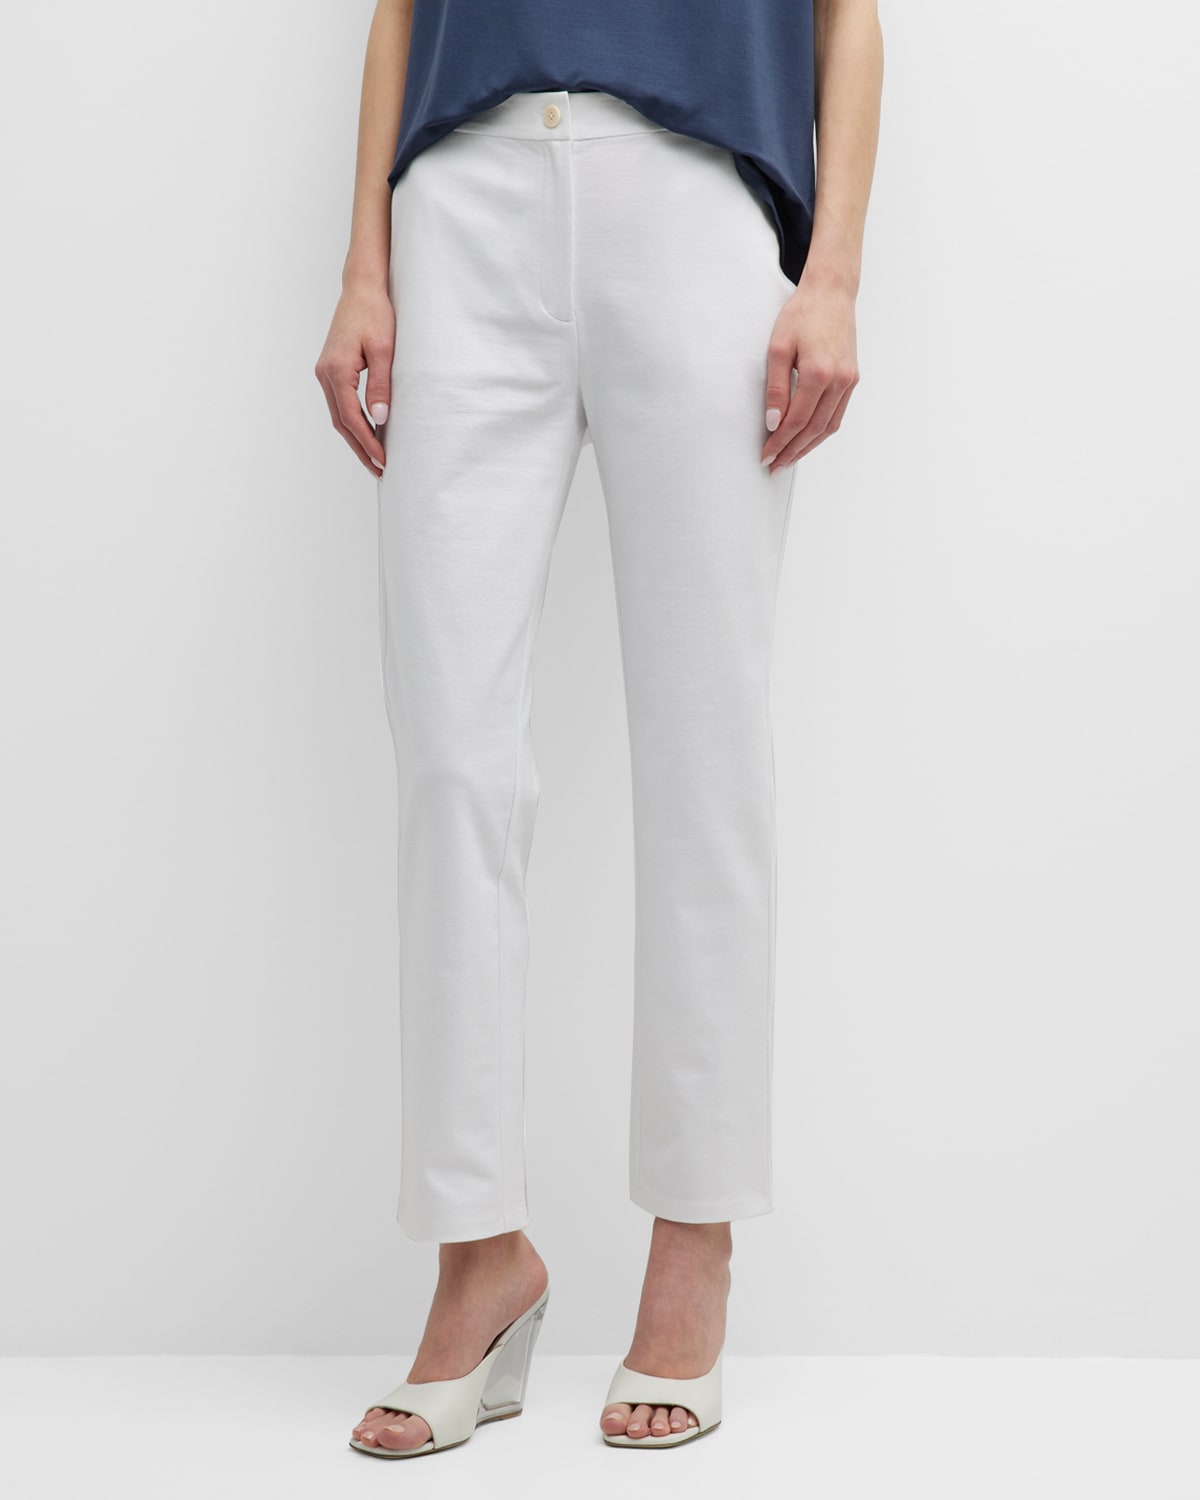 EILEEN FISHER PETITE HIGH-RISE PONTE ANKLE PANTS